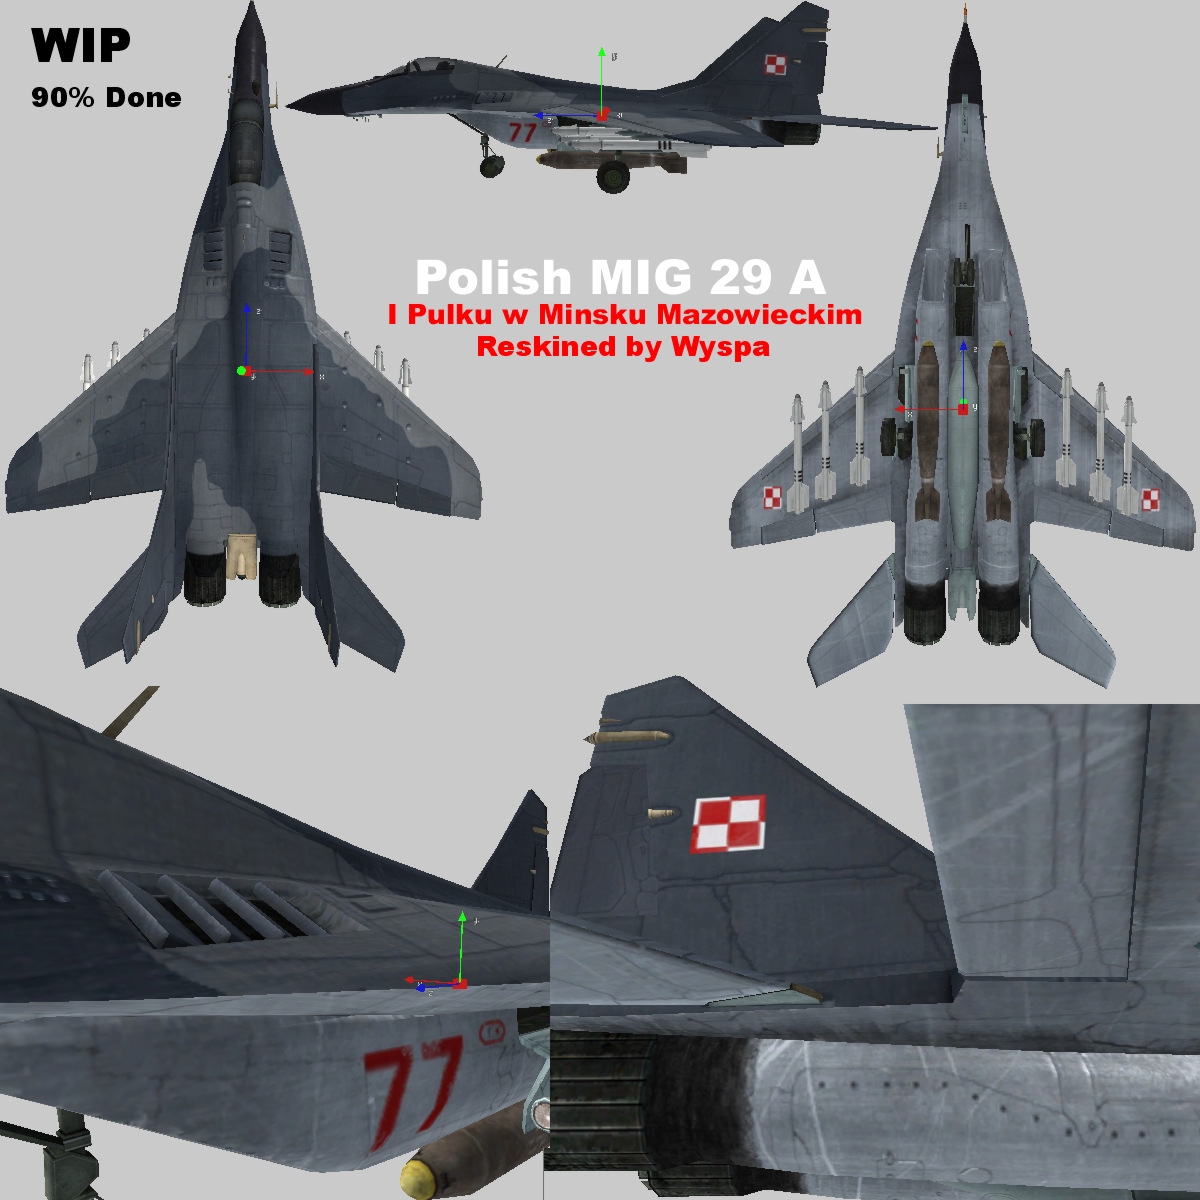 Project Reality - Polisch Project Mig 29